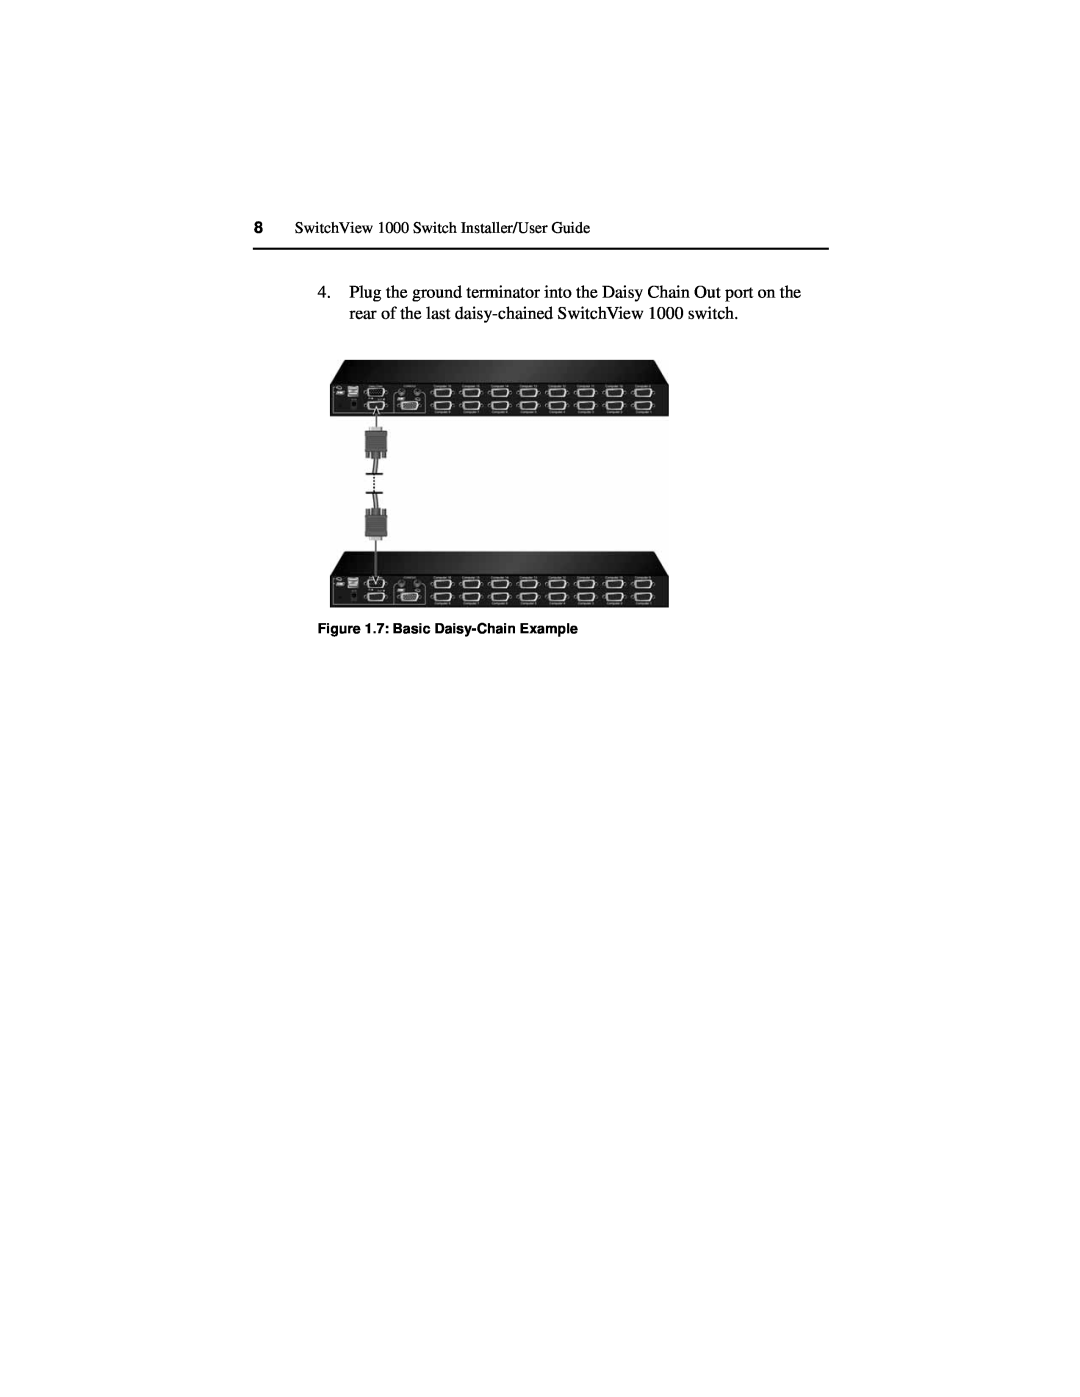 Avocent manual SwitchView 1000 Switch Installer/User Guide, 7 Basic Daisy-Chain Example 